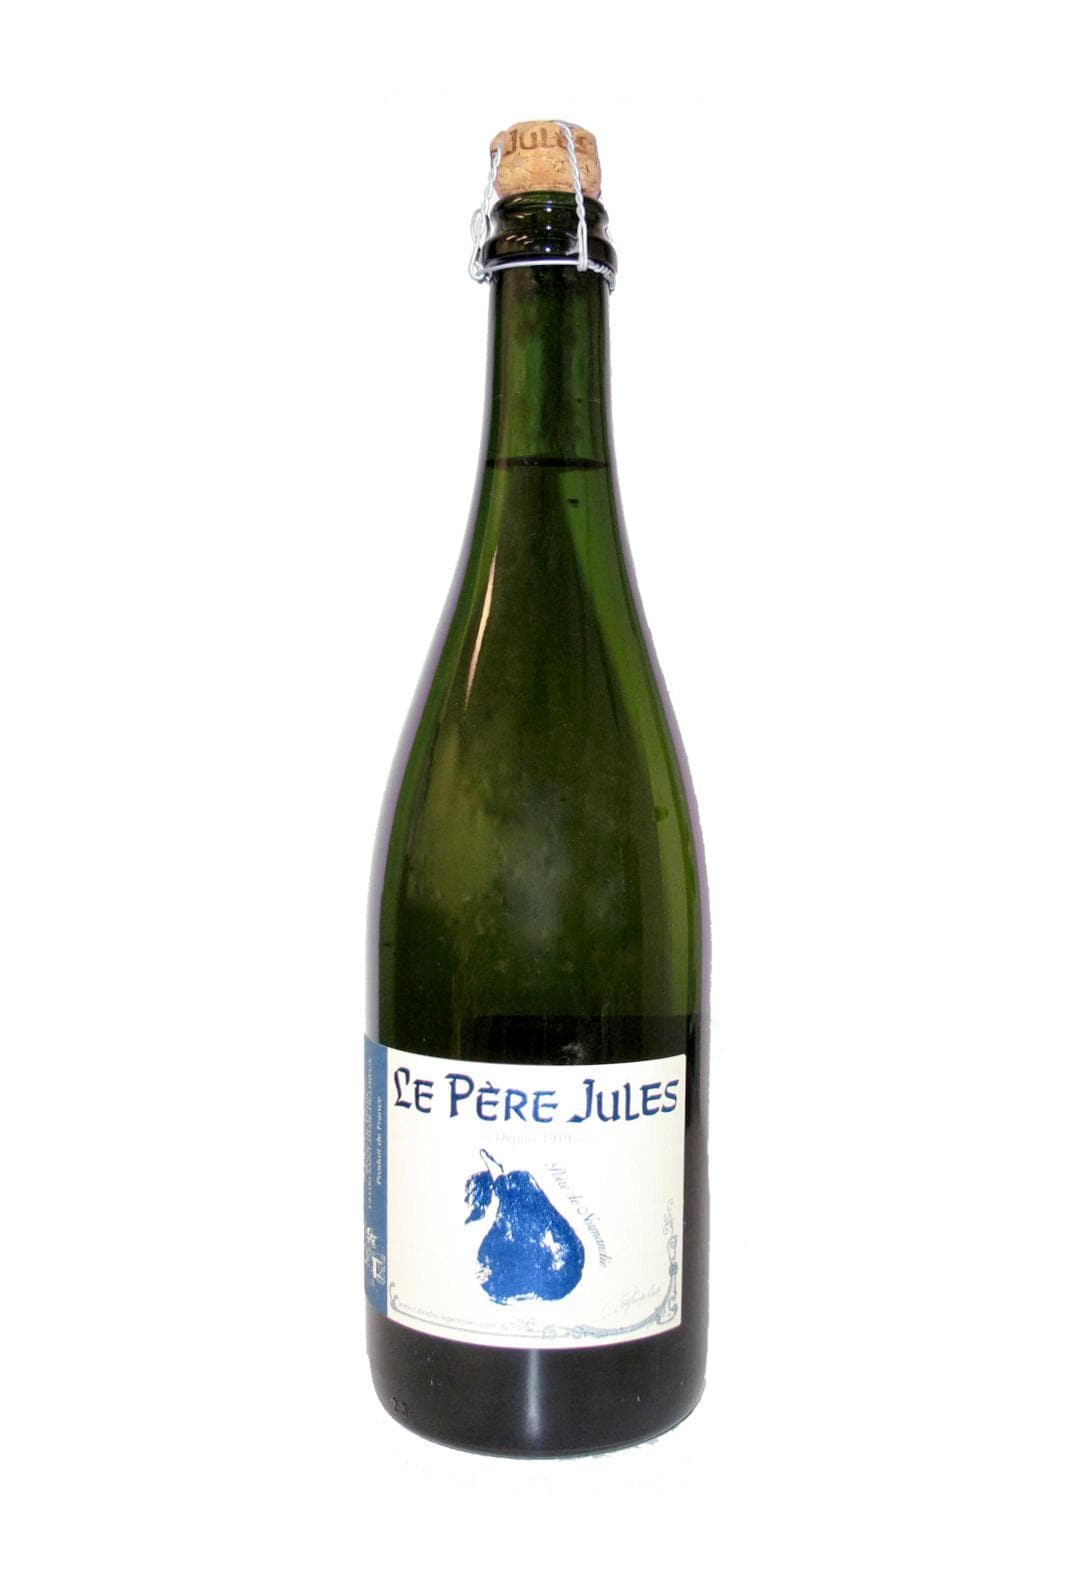 Pere Jules Poire Bouche (semi-dry Pear cider) Pays d'Auge 4% 750ml | Hard Cider | Shop online at Spirits of France